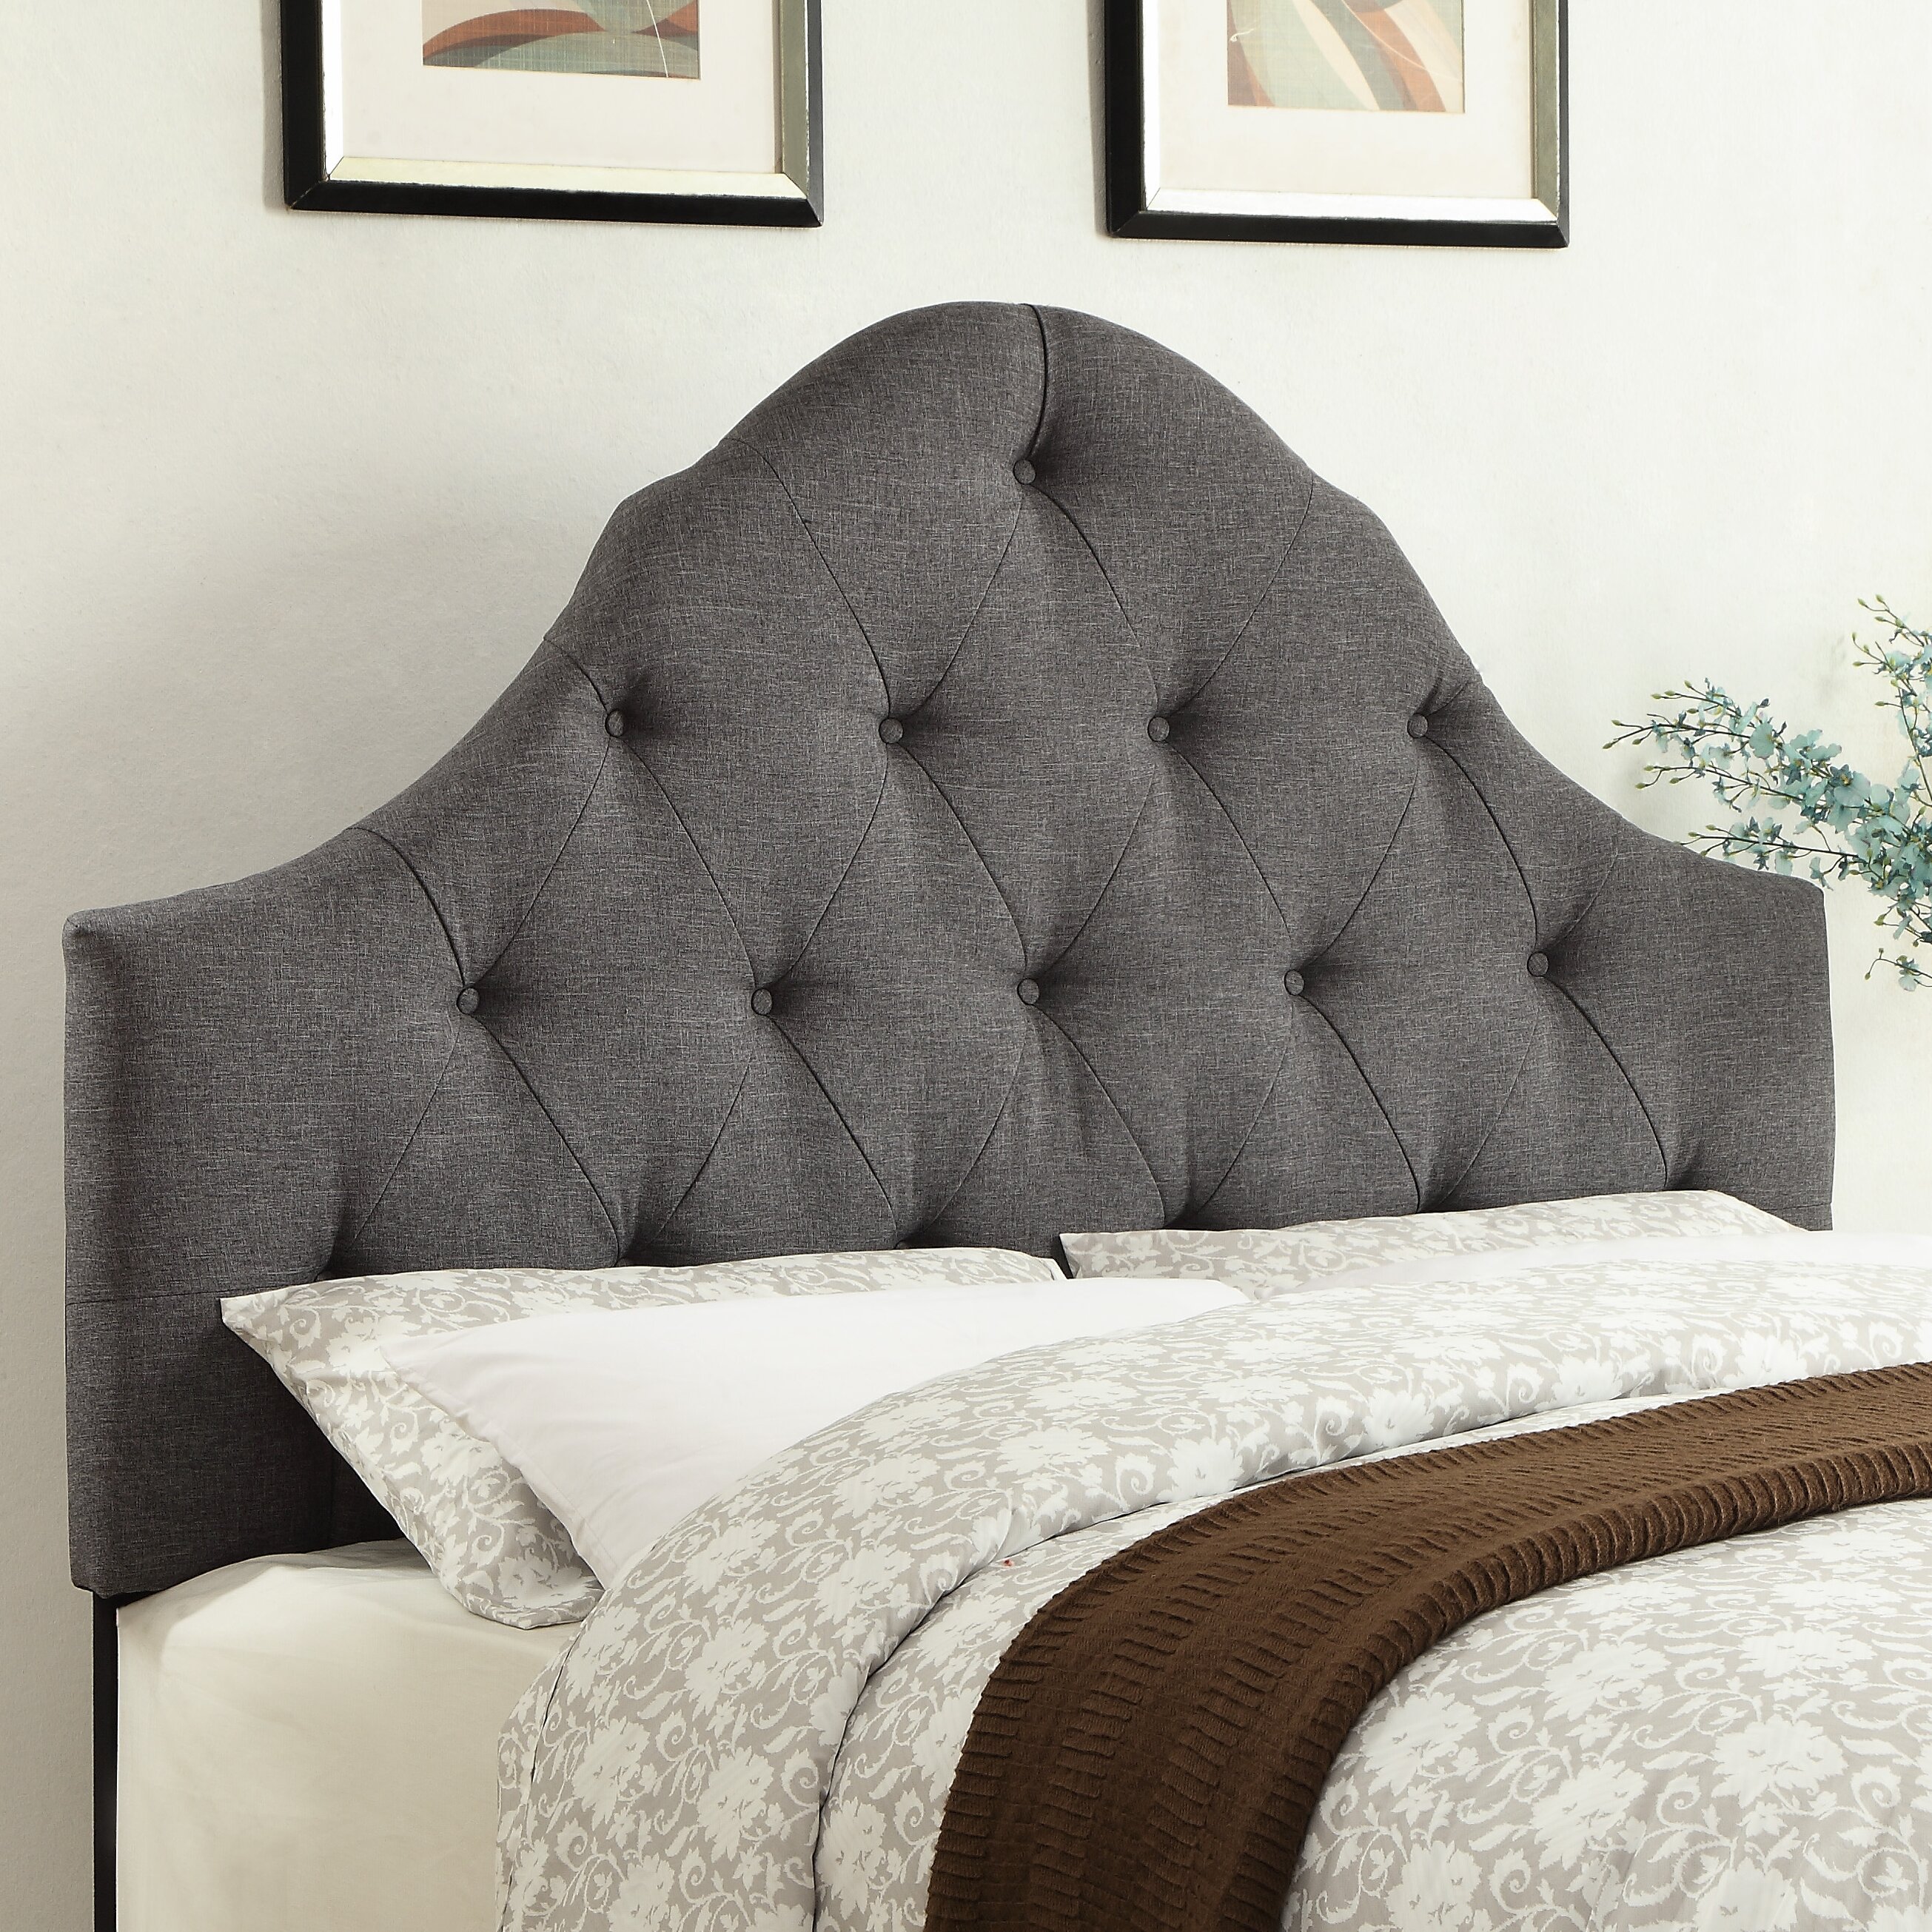 Darby Home Co Neiman Upholstered Curved Headboard & Reviews | Wayfair